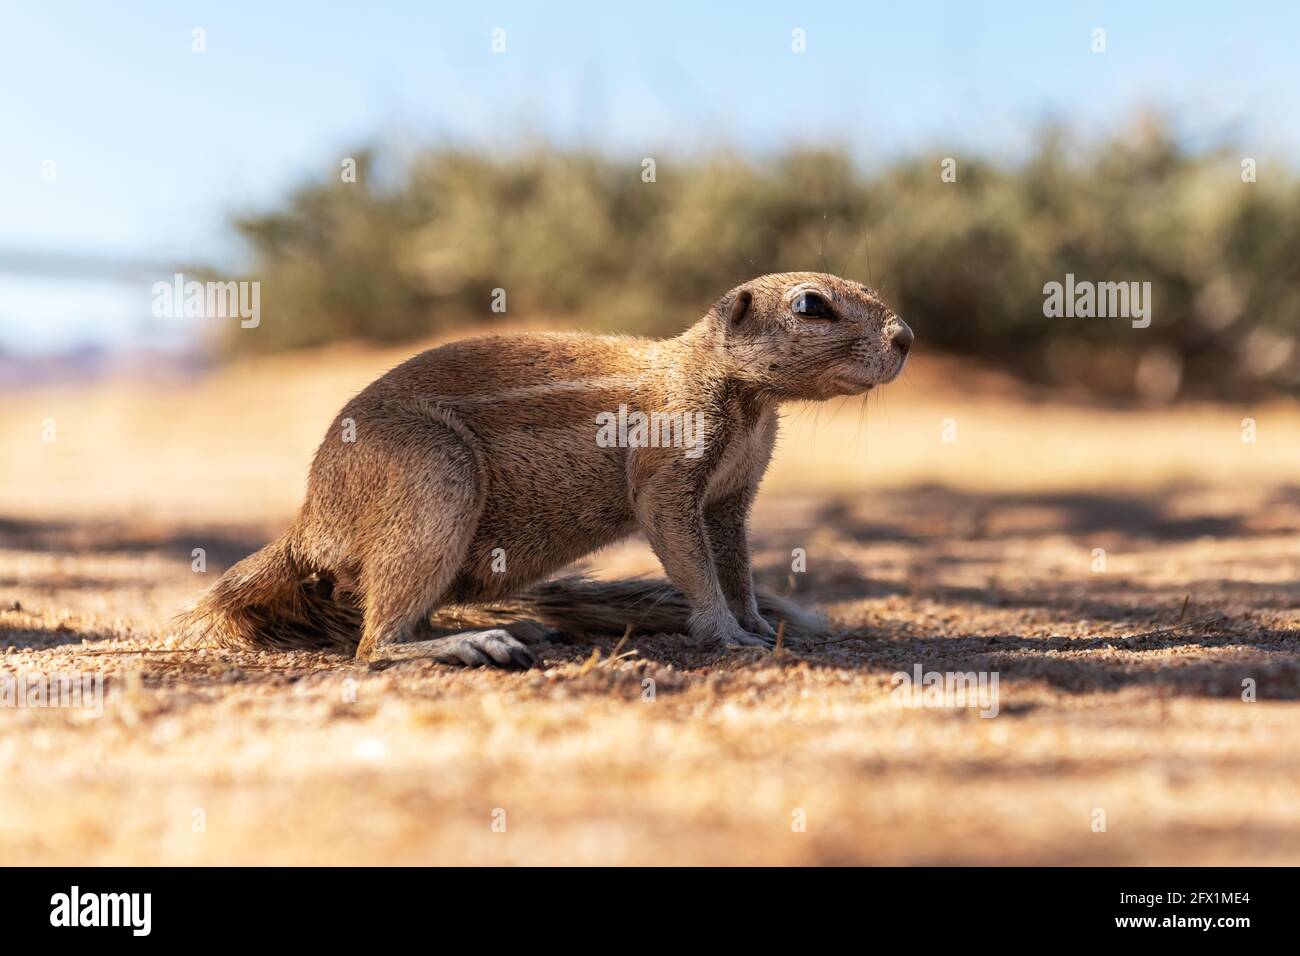 African ground squirrel in Namibia, Africa. Wildlife photography Stock Photo